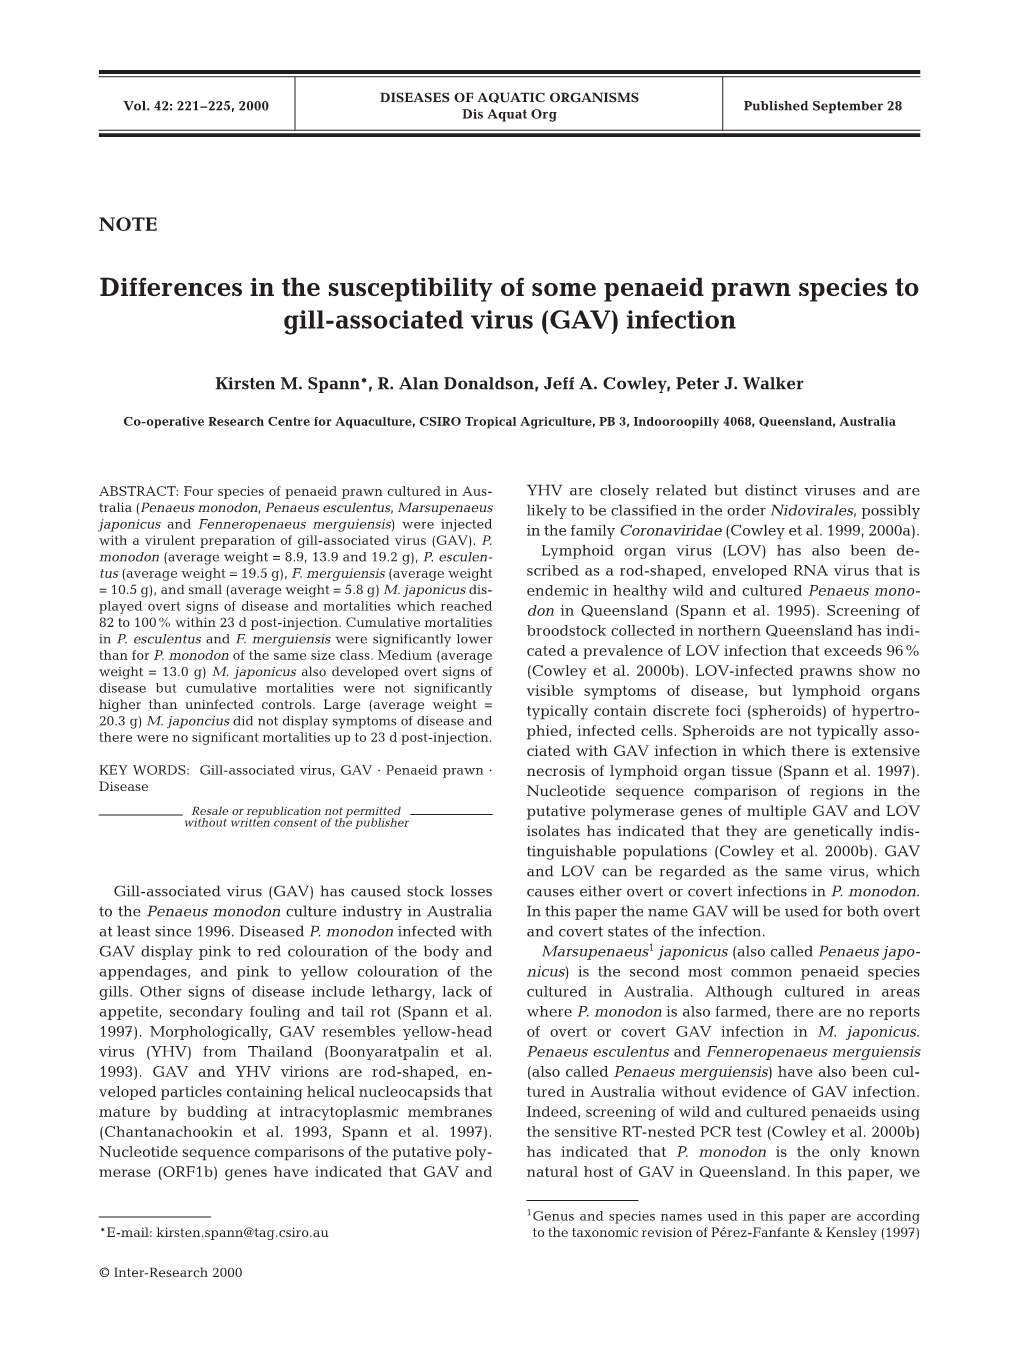 Differences in the Susceptibility of Some Penaeid Prawn Species to Gill-Associated Virus (GAV) Infection